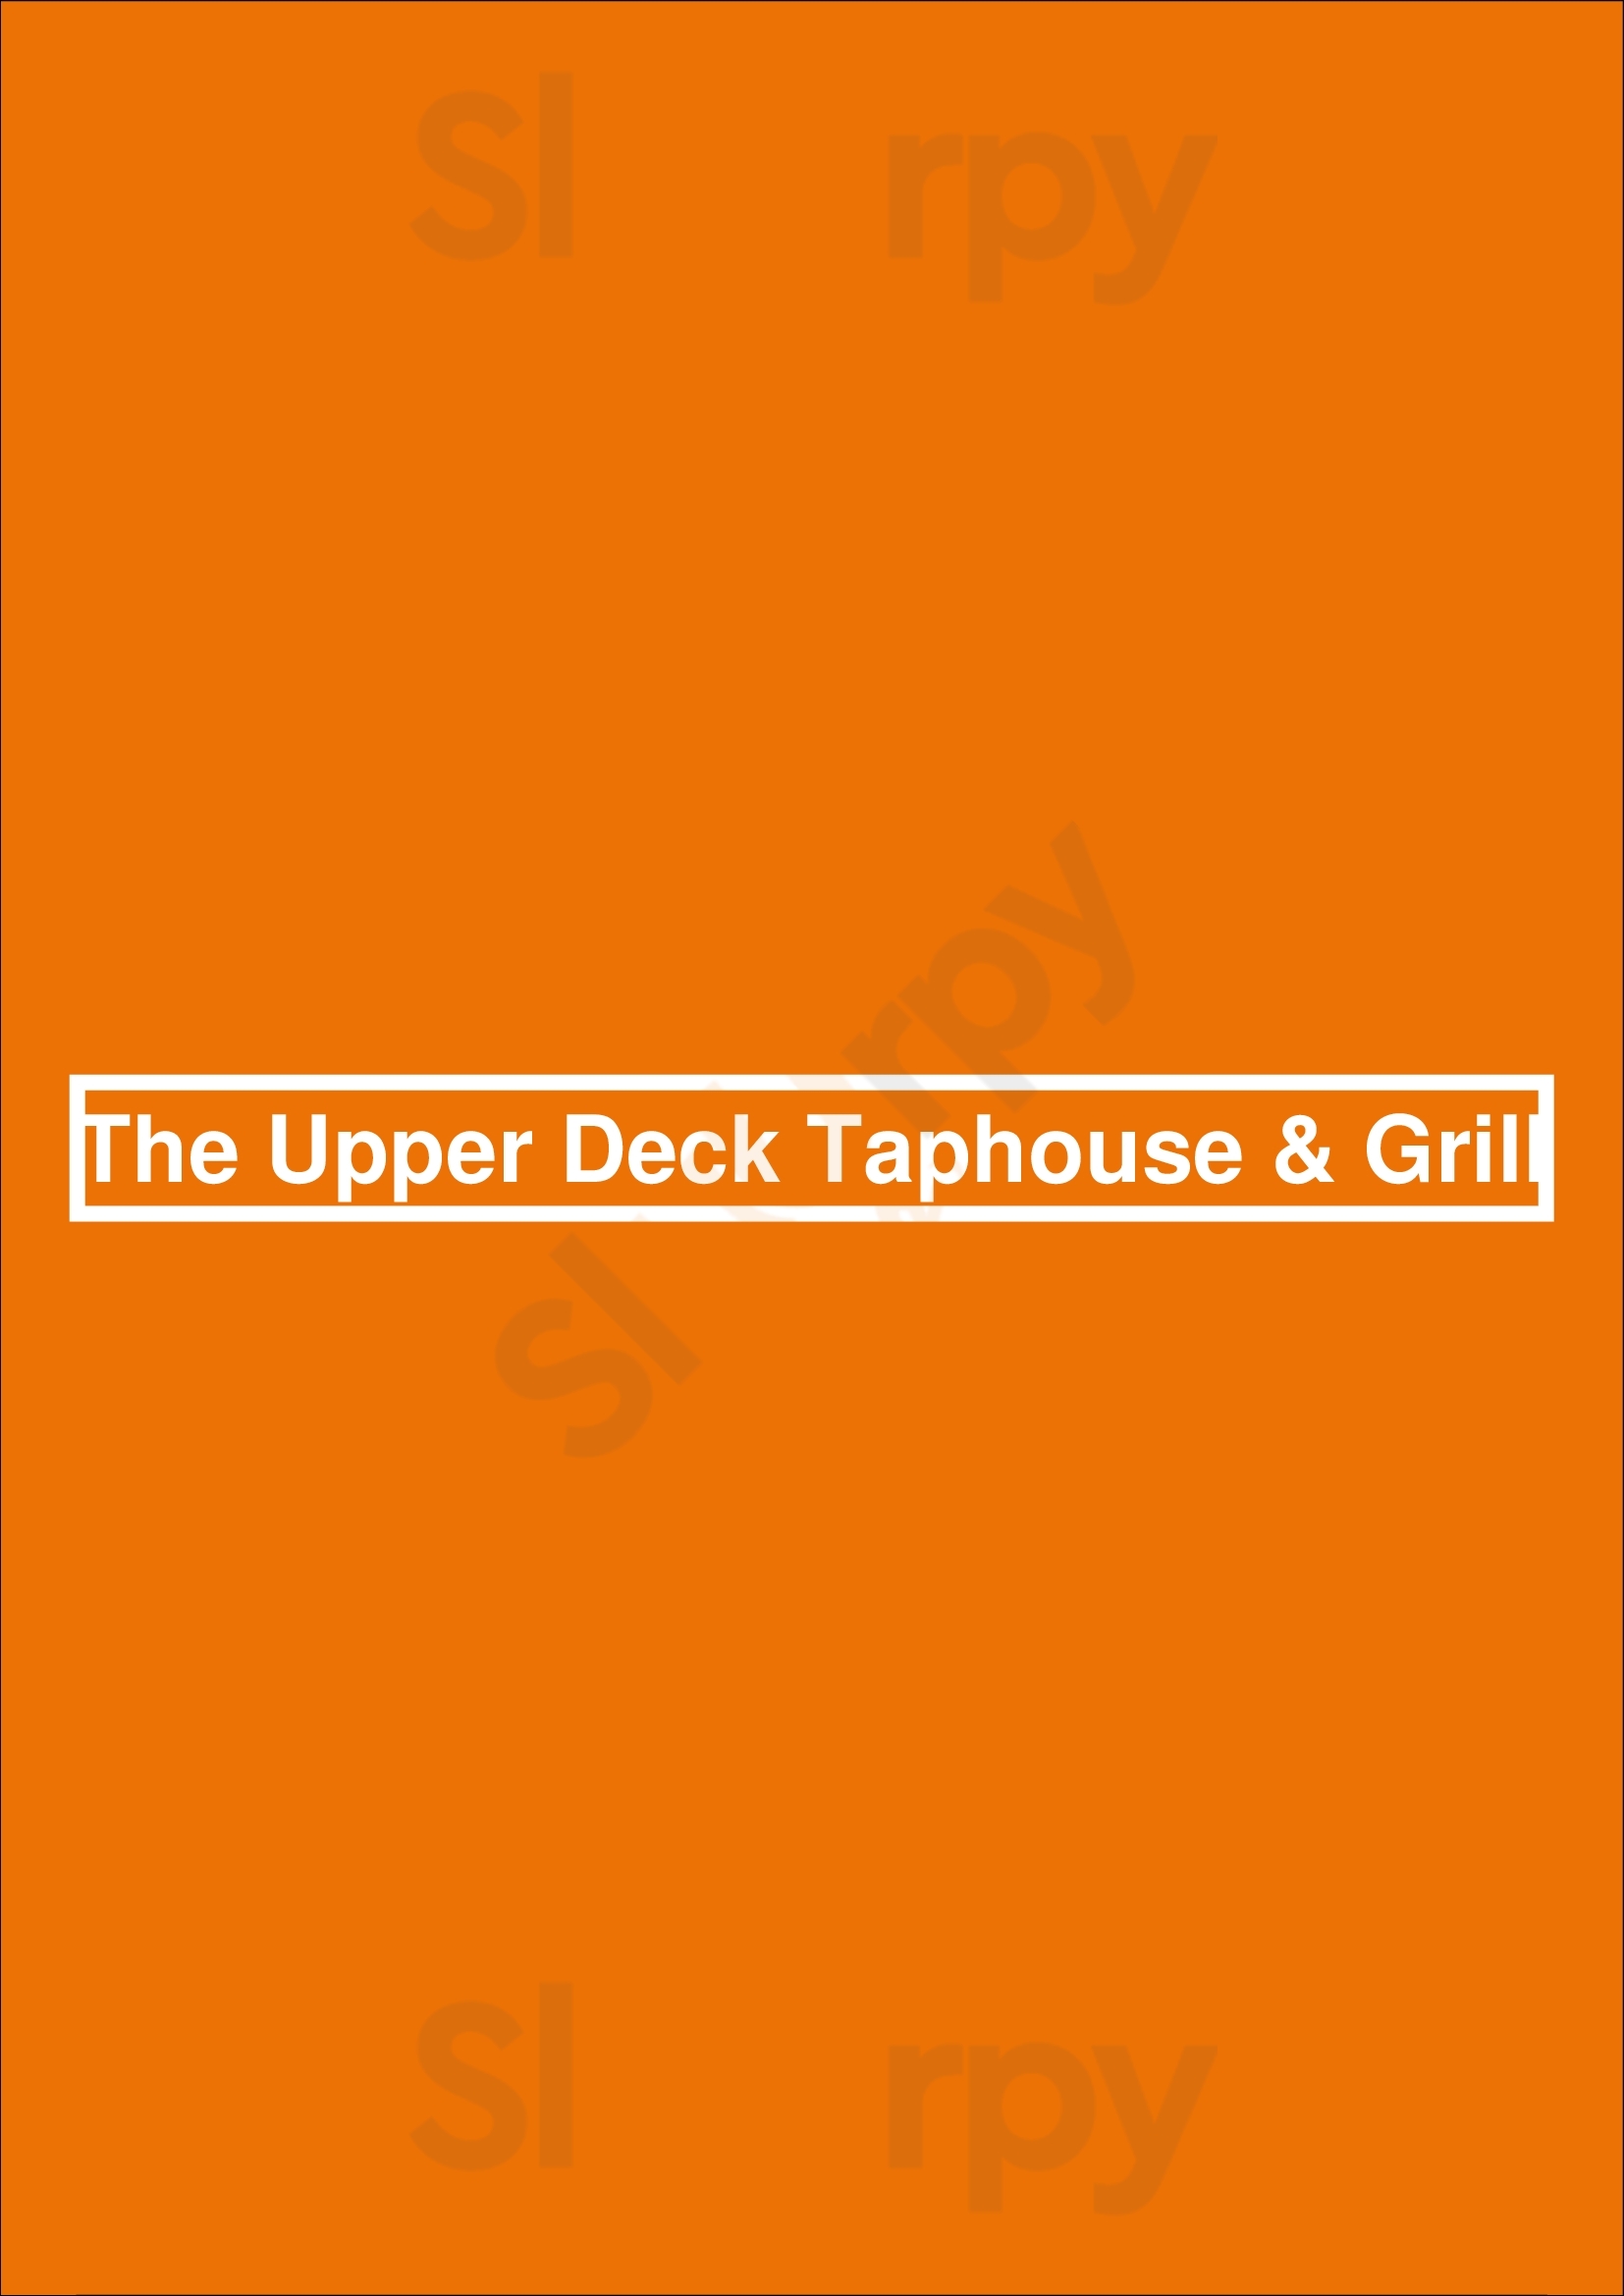 The Upper Deck Taphouse & Grill St. Catharines Menu - 1